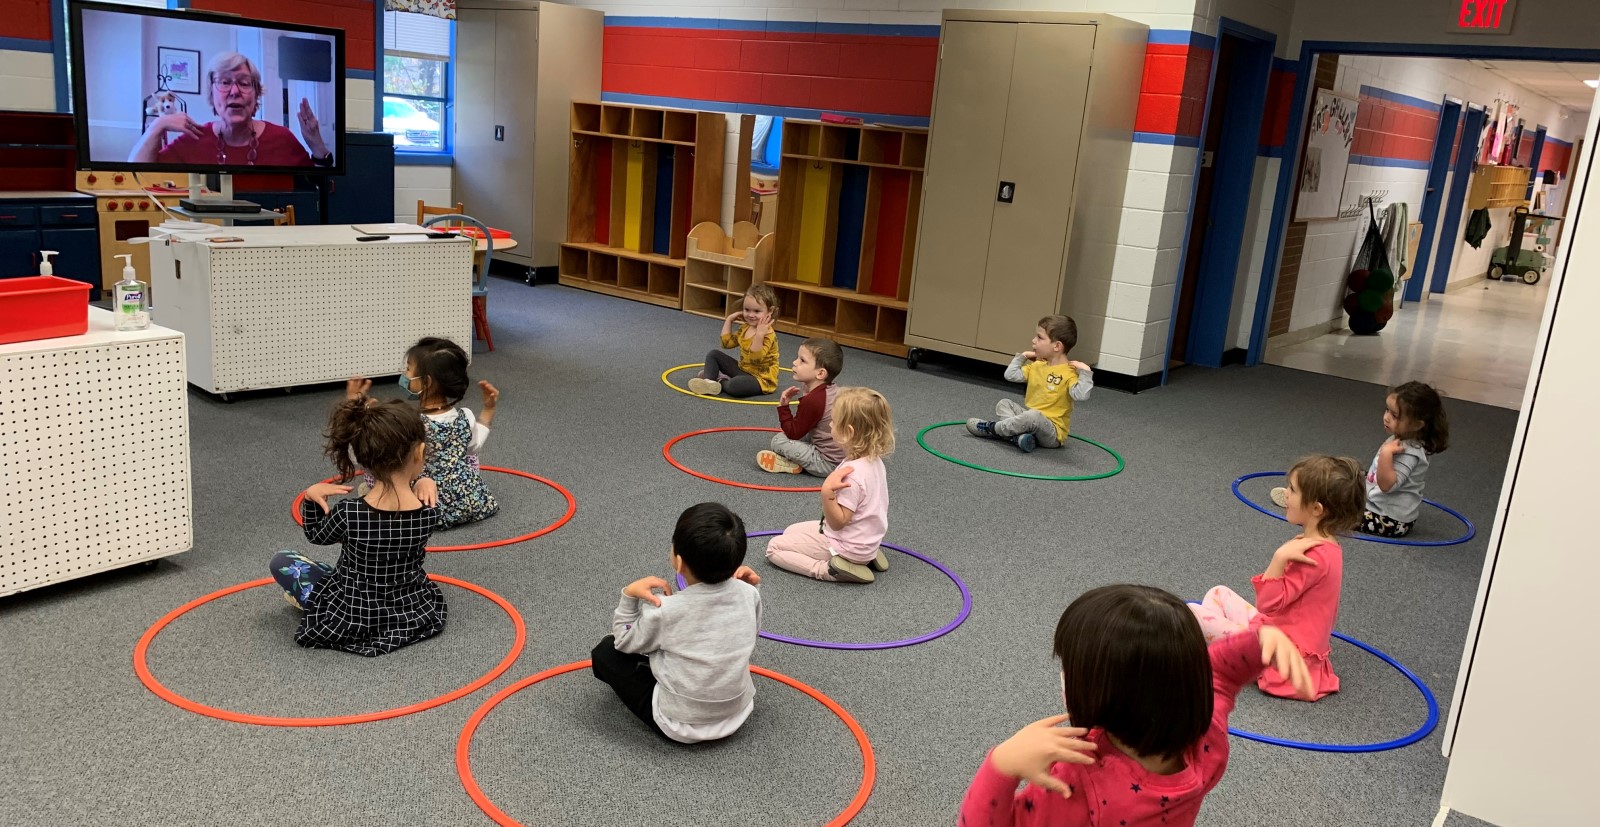 kids in a preschool classroom sit in hula hoops and engage with a live virtual storytime